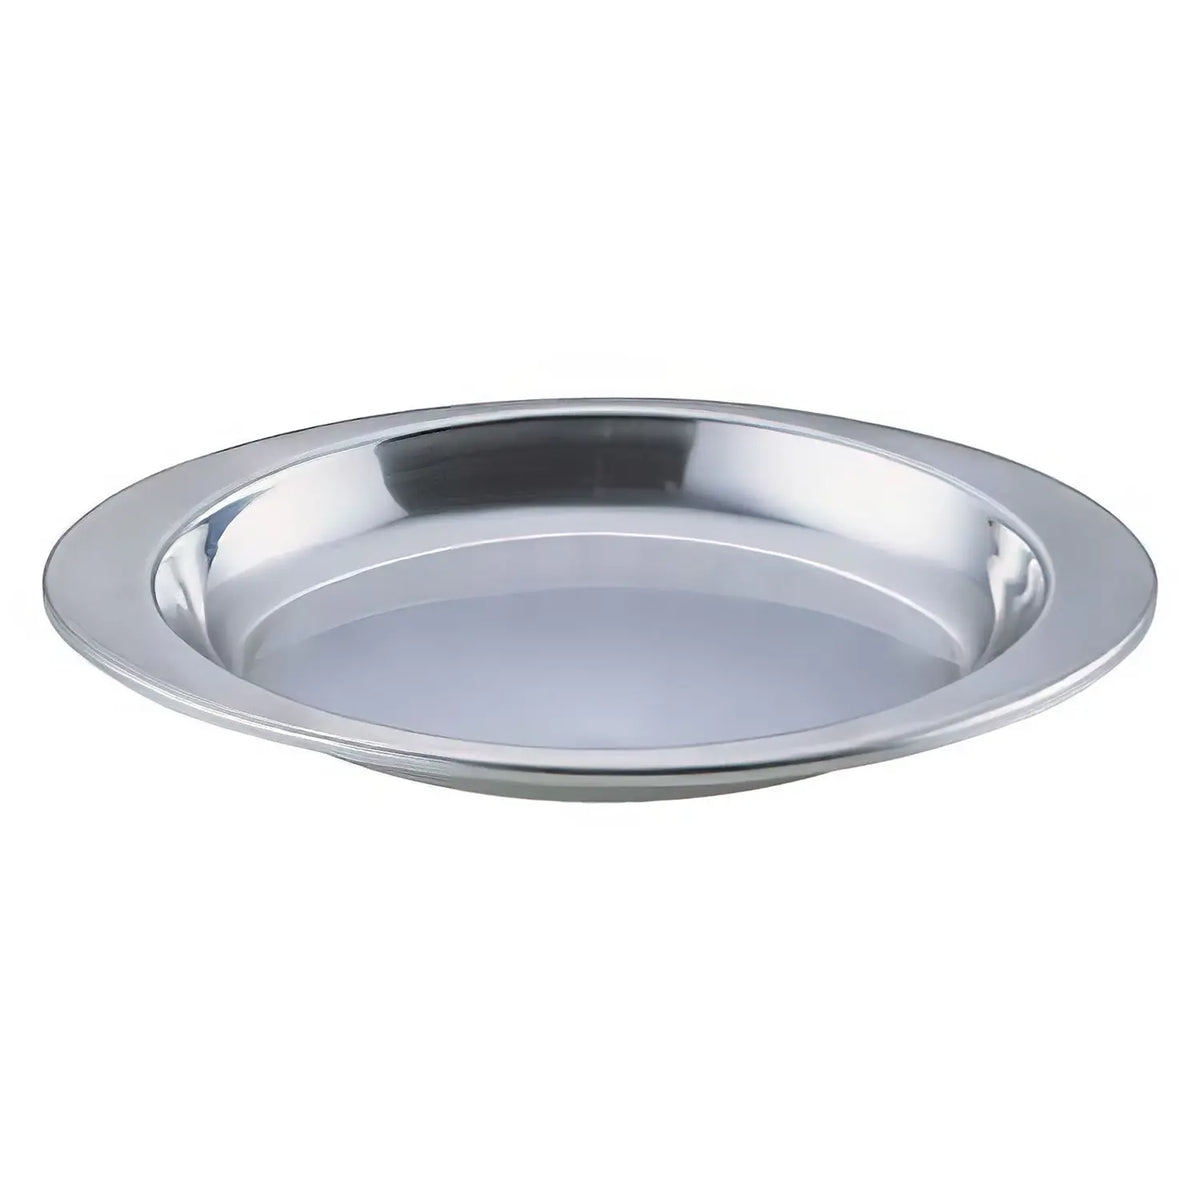 Ikeda Eco Clean Stainless Steel Oval Lunch Plate